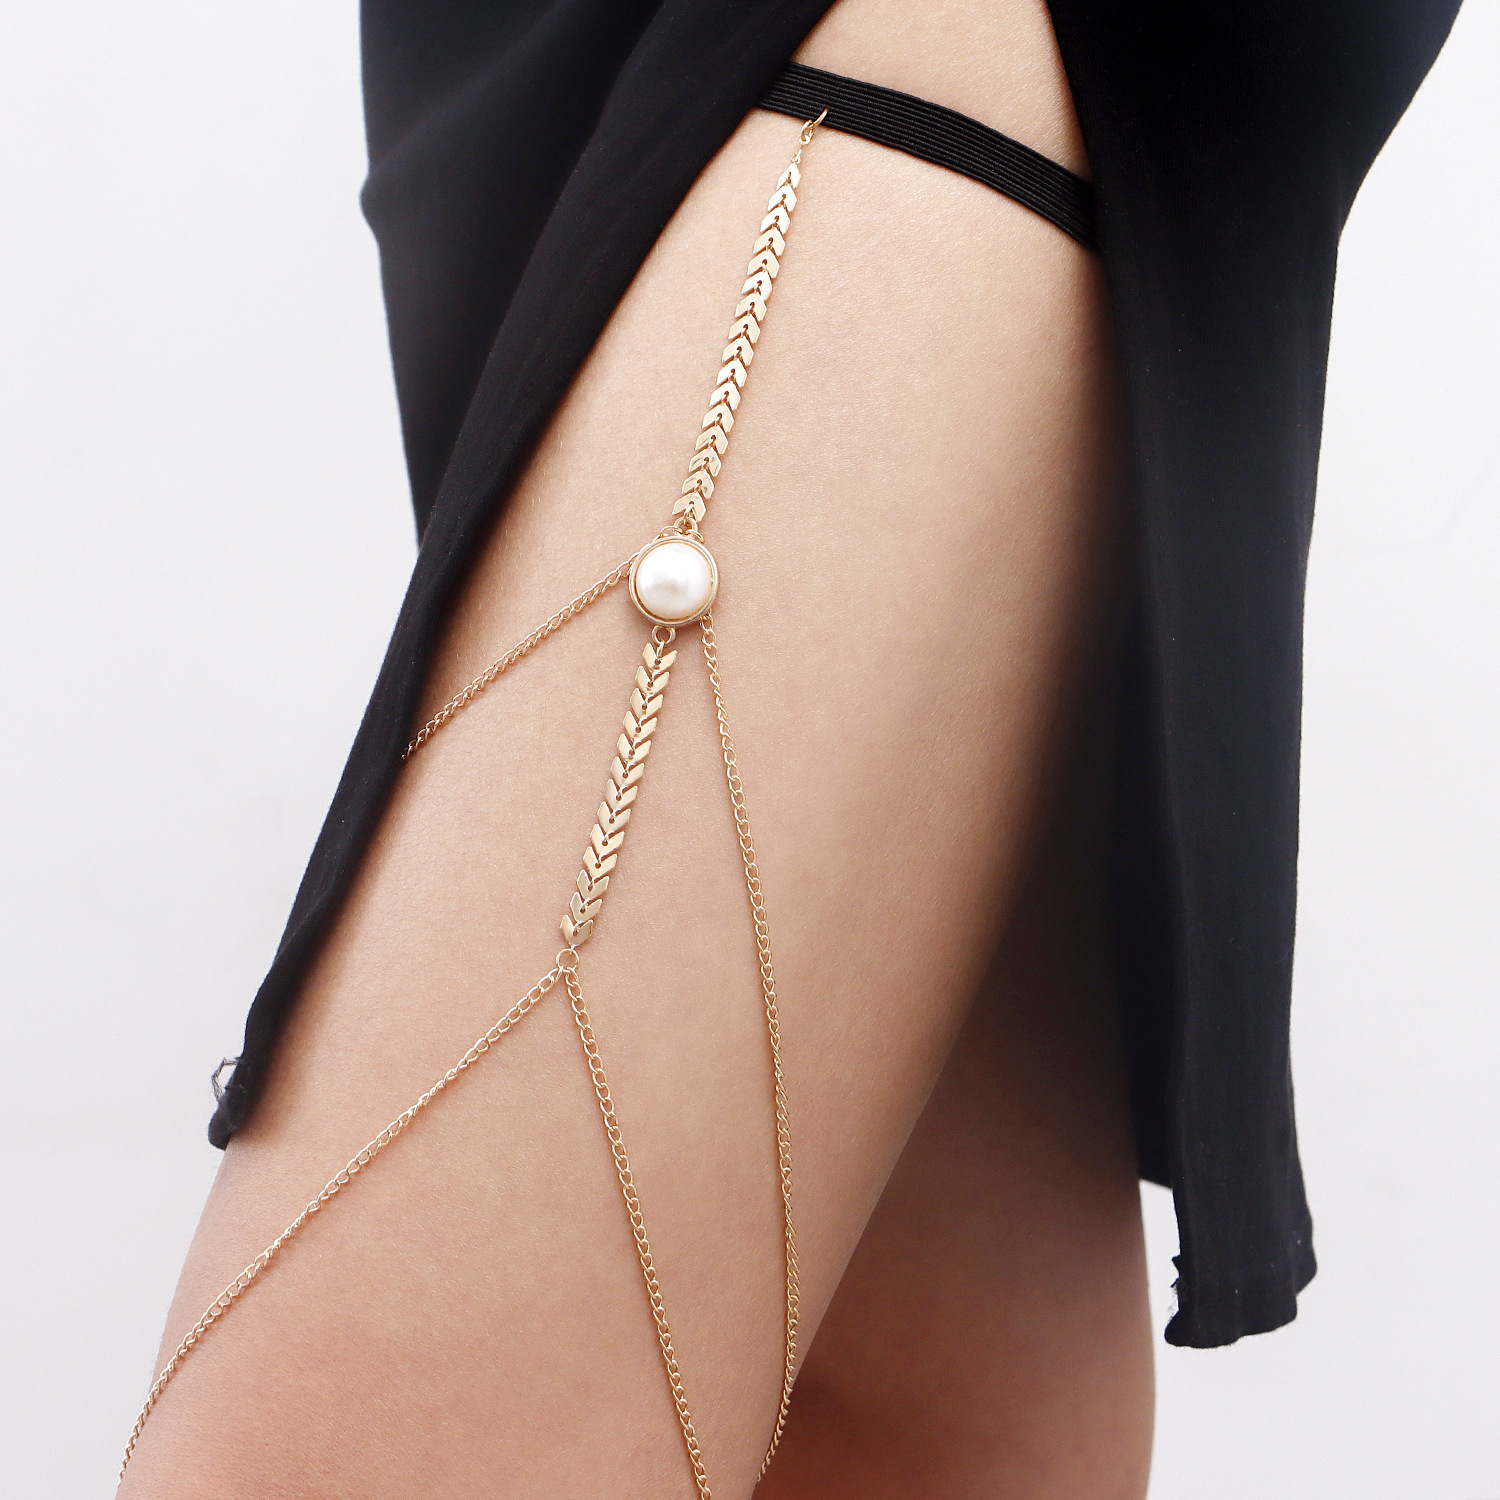  Chicque Gold Coin Thigh Chains Jewelry Sexy Leg